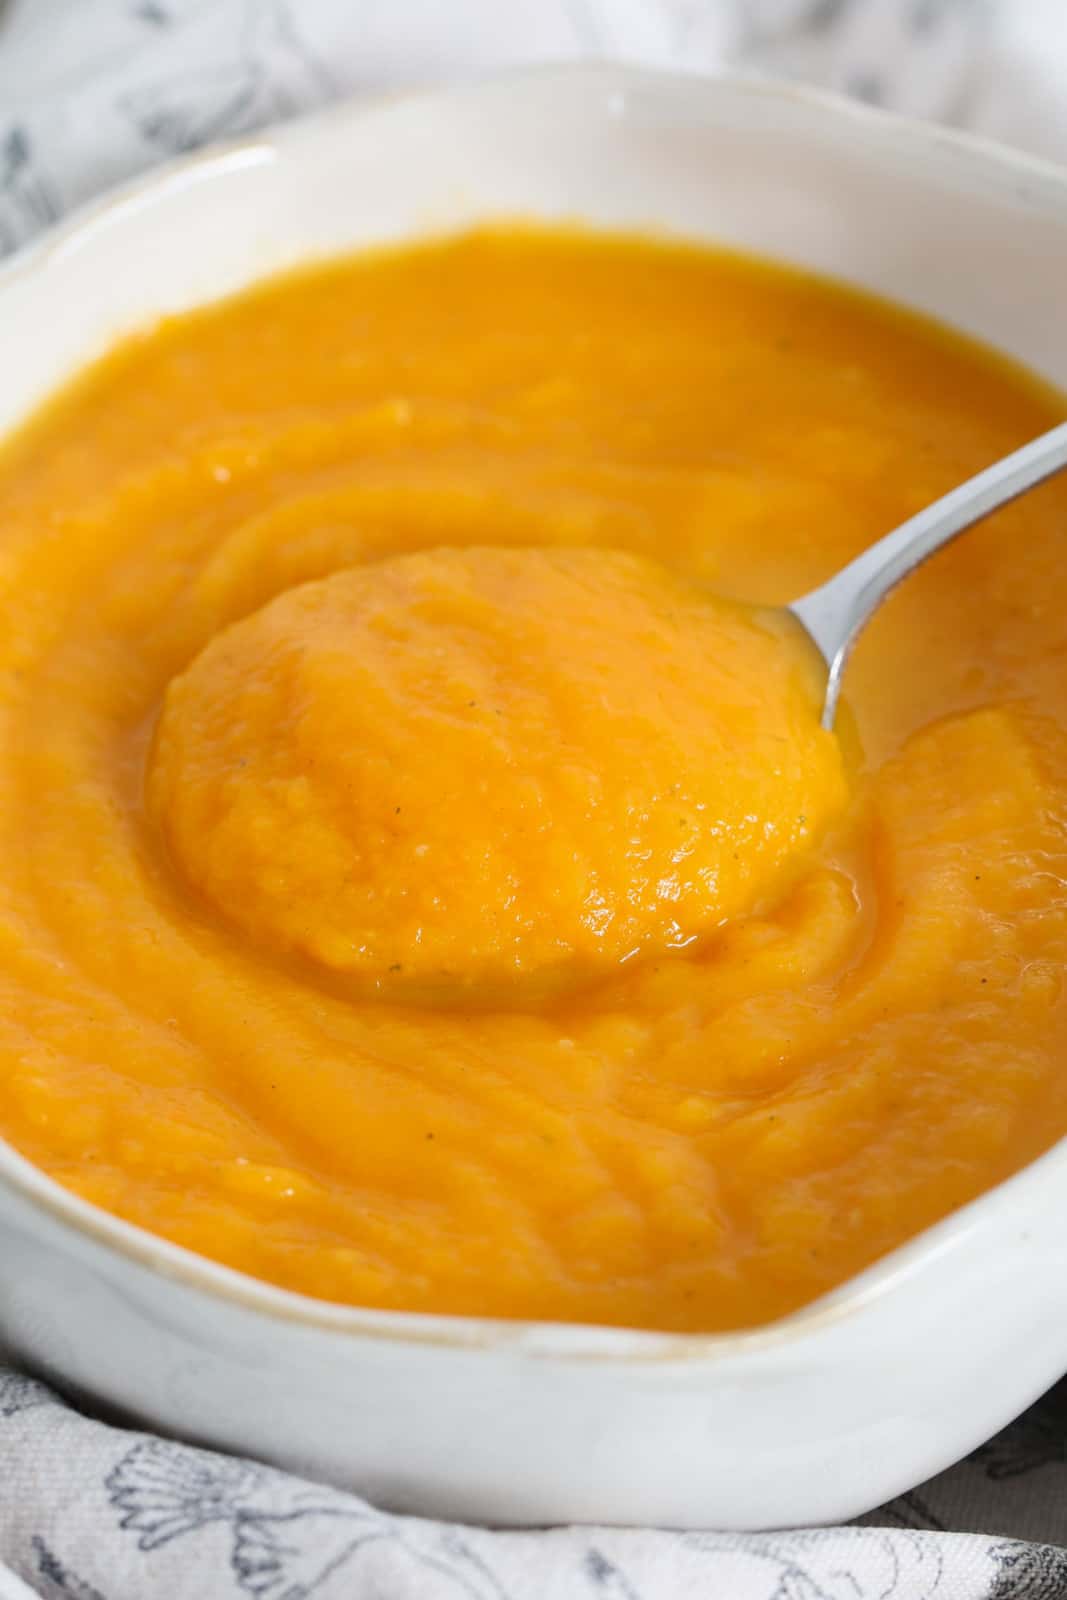 A close up view of a white bowl with a soup spoon lifting a spoonful of thick orange coloured soup.